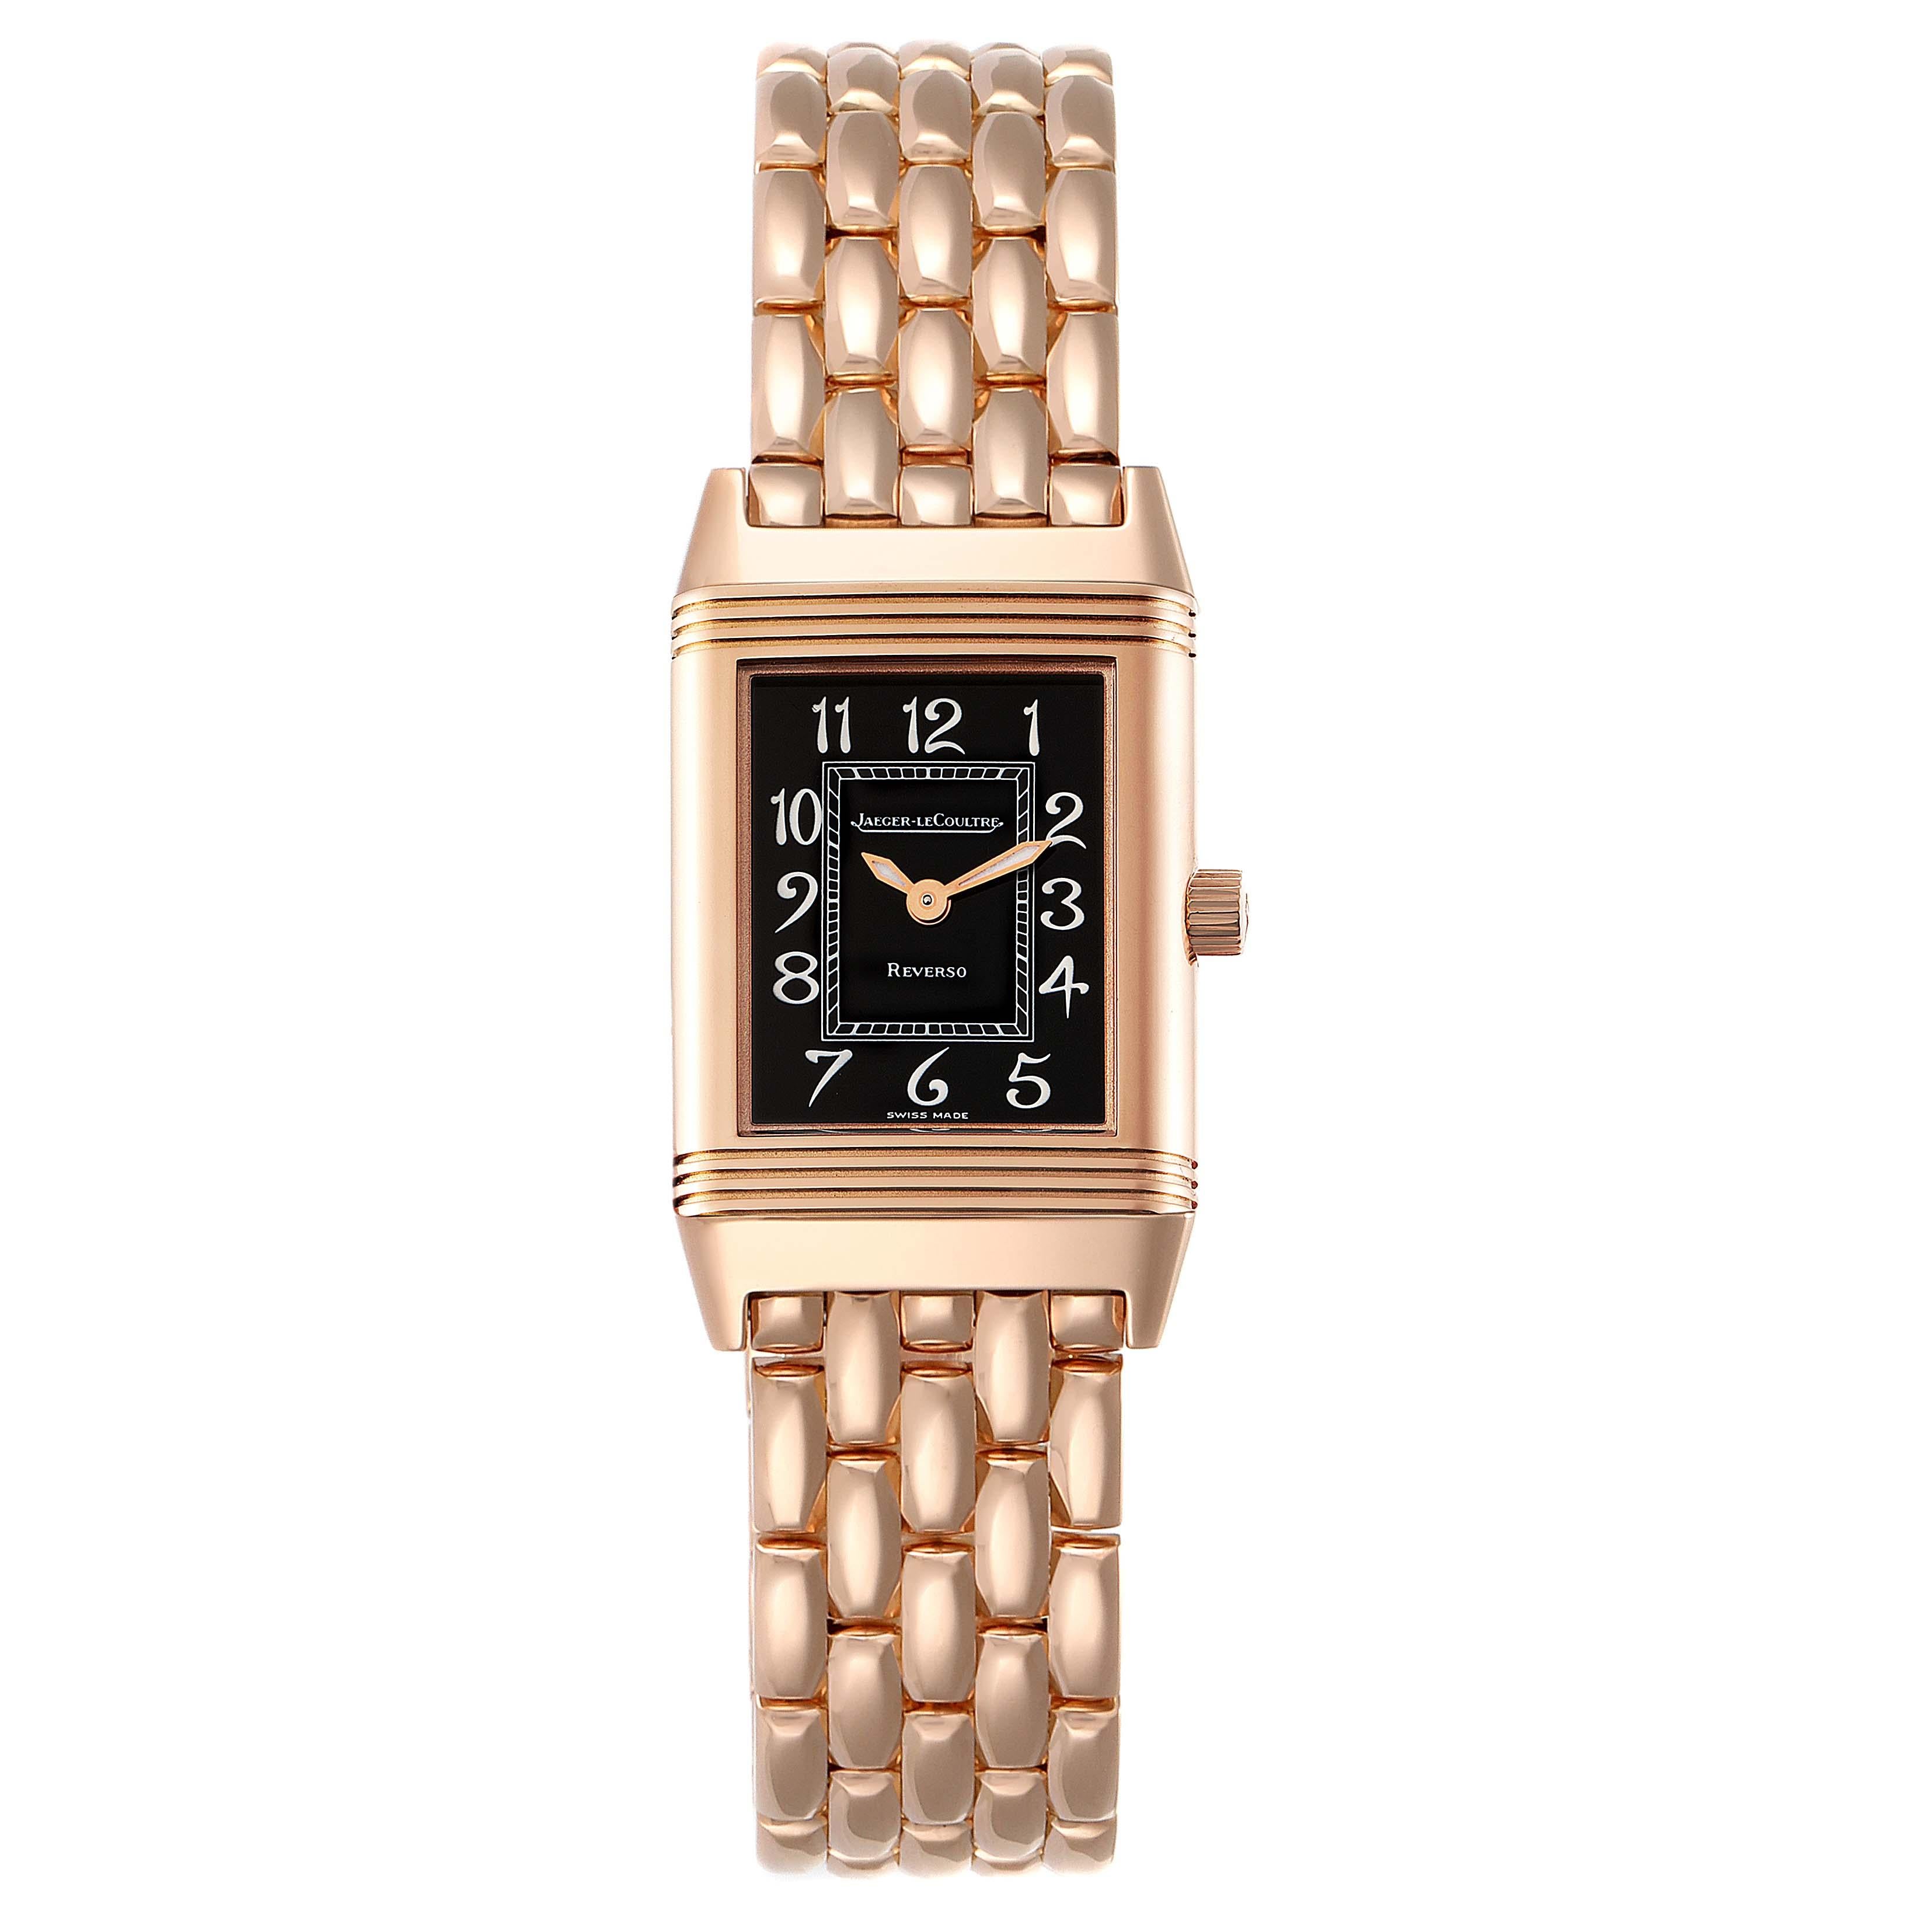 Jaeger LeCoultre Reverso Rose Gold Ladies Watch 260.2.86 Box Papers. Manual winding movement. 18K rose gold 33.0 x 19.0 mm case rectangular case with reeded ends rotating within its back plate. 18K rose gold bezel. Scratch resistant sapphire